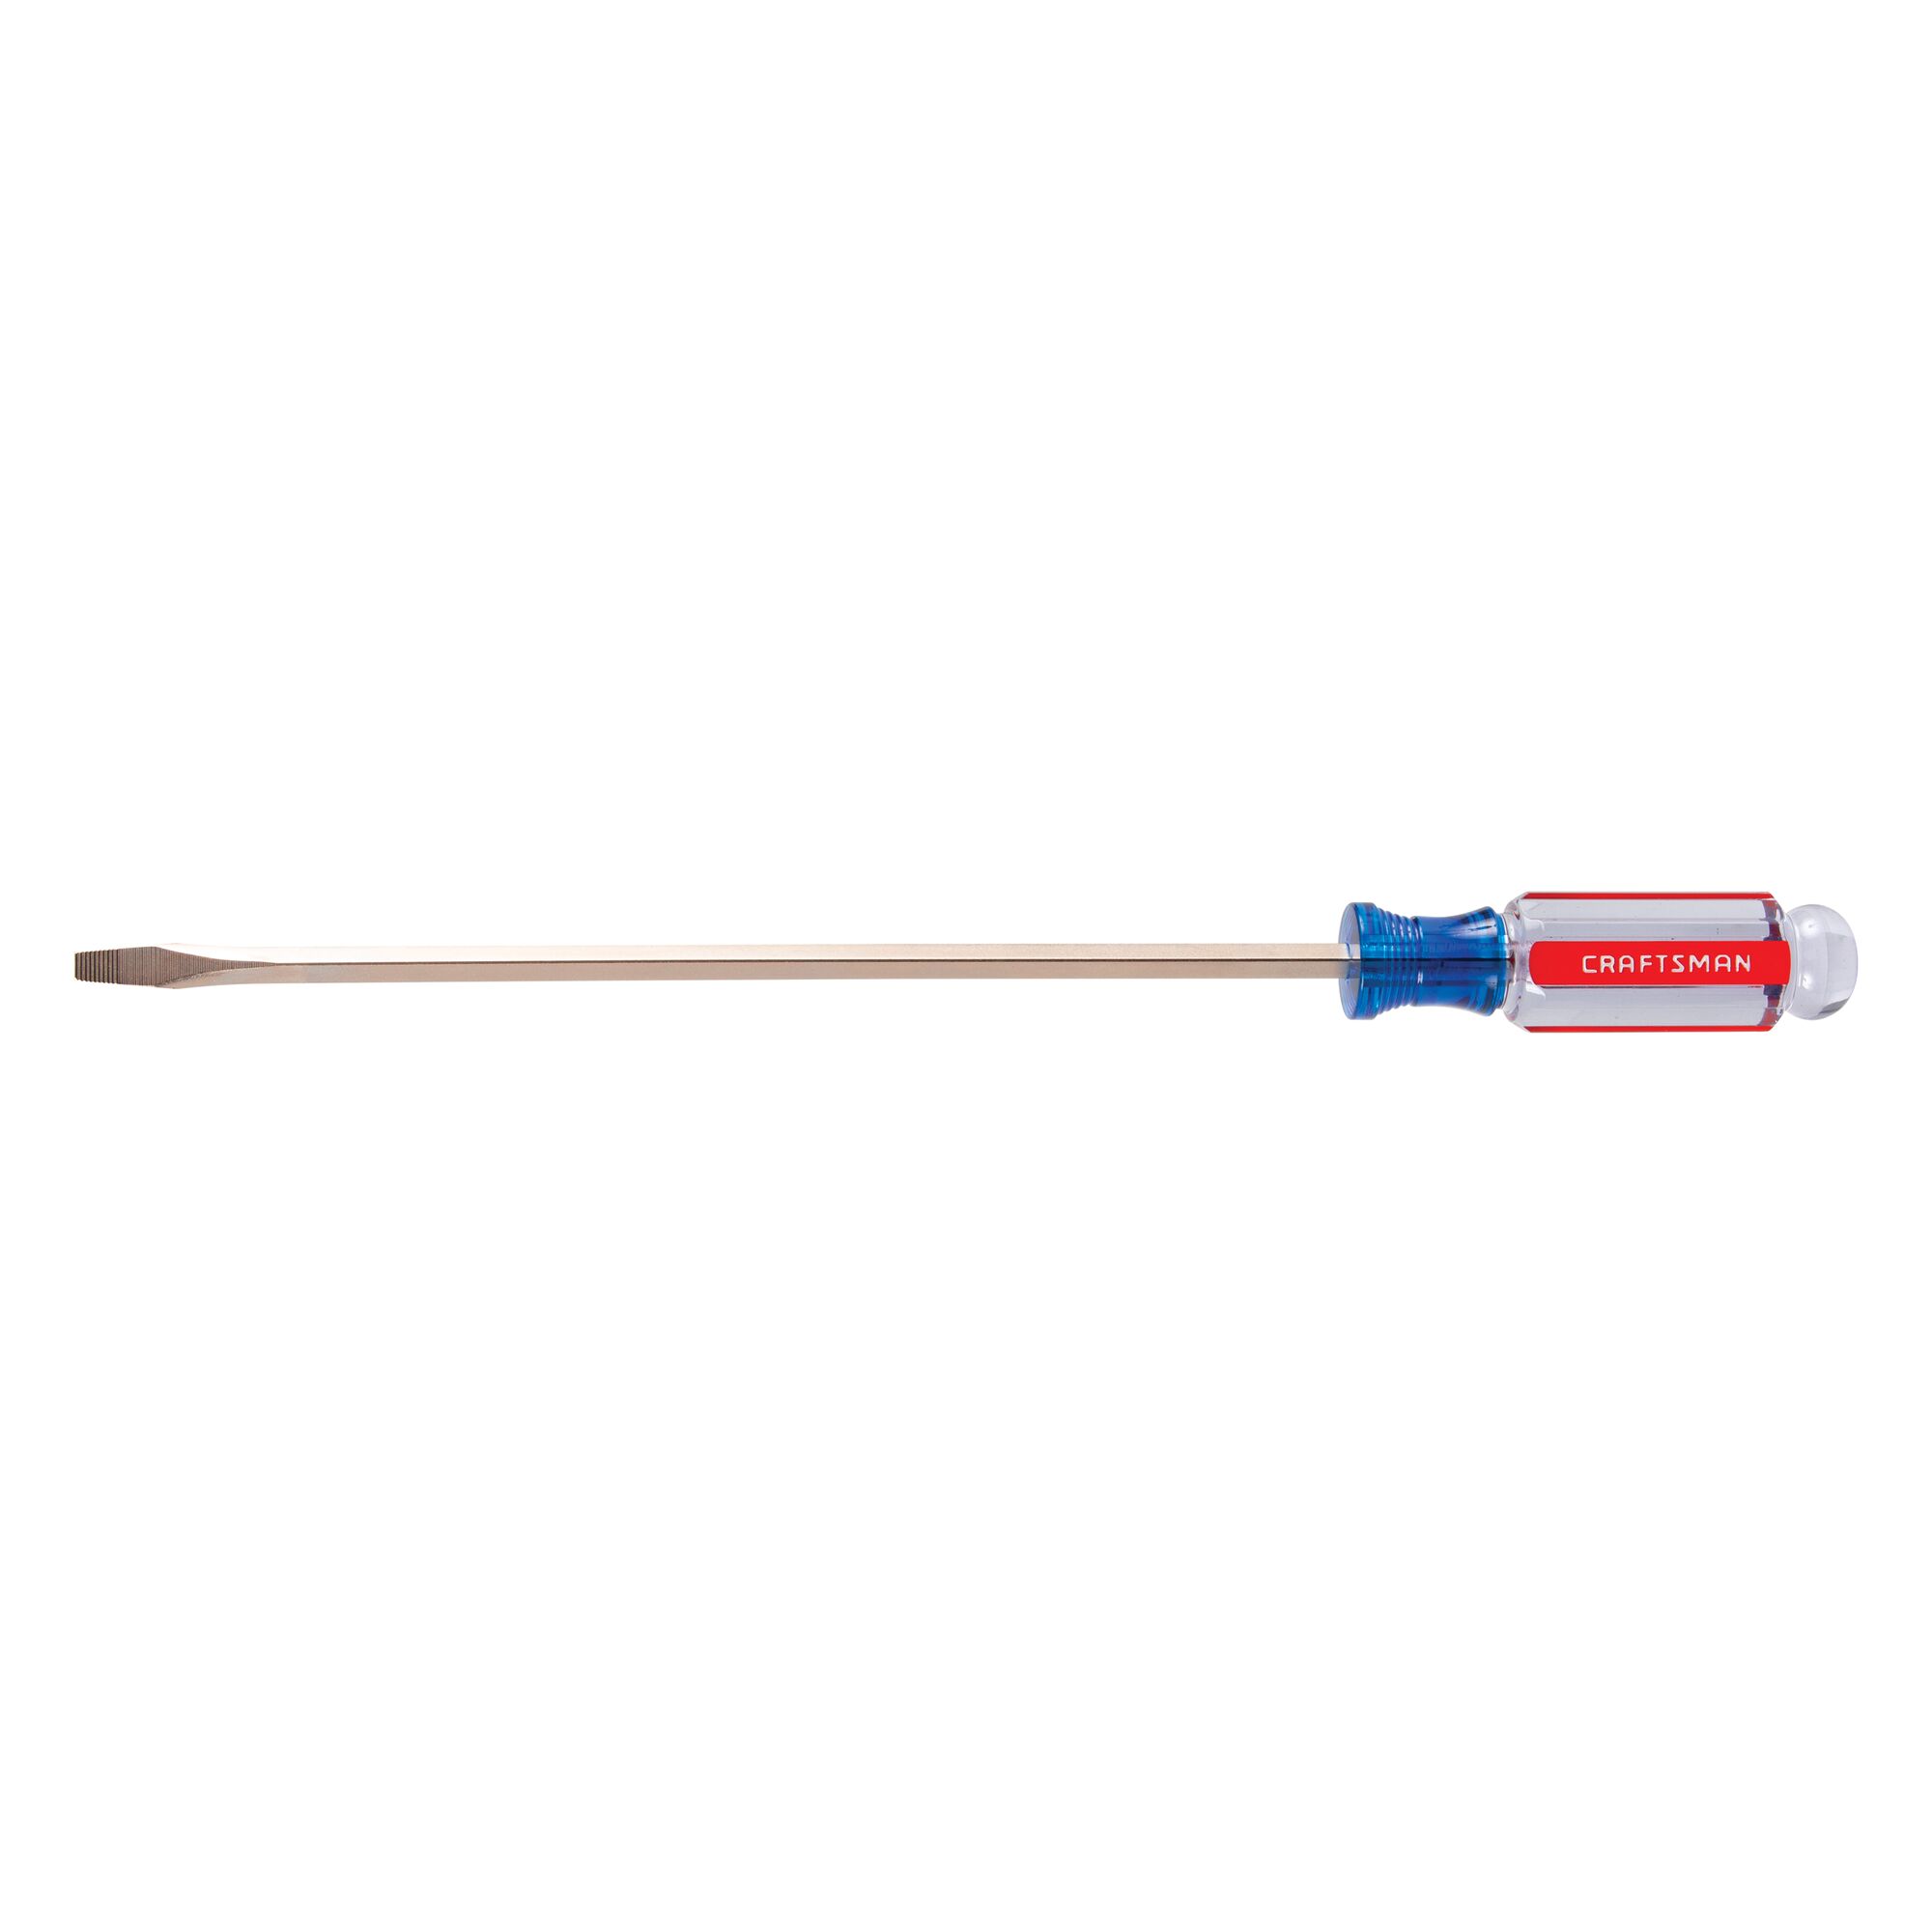 Three sixteenths inch by 9 inch Slotted Acetate ScrewDriver.